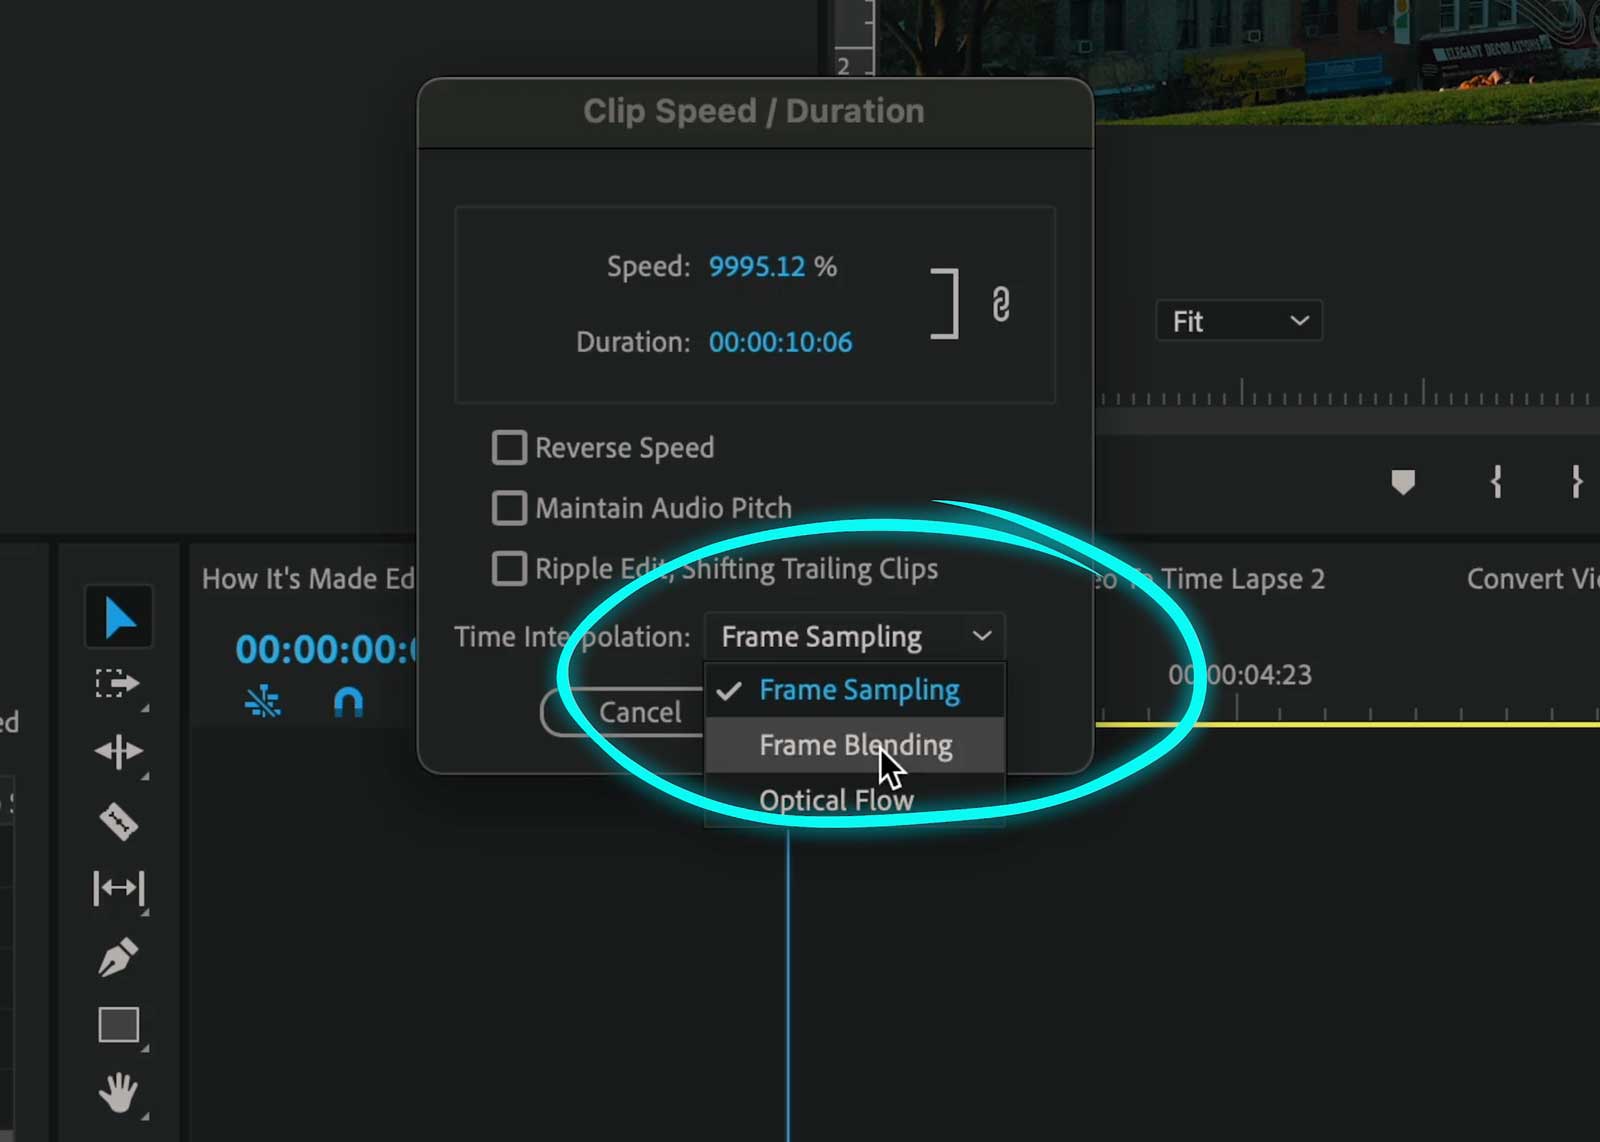 Using premiere's frame blending feature to mimic motion blur to convert video to time lapse